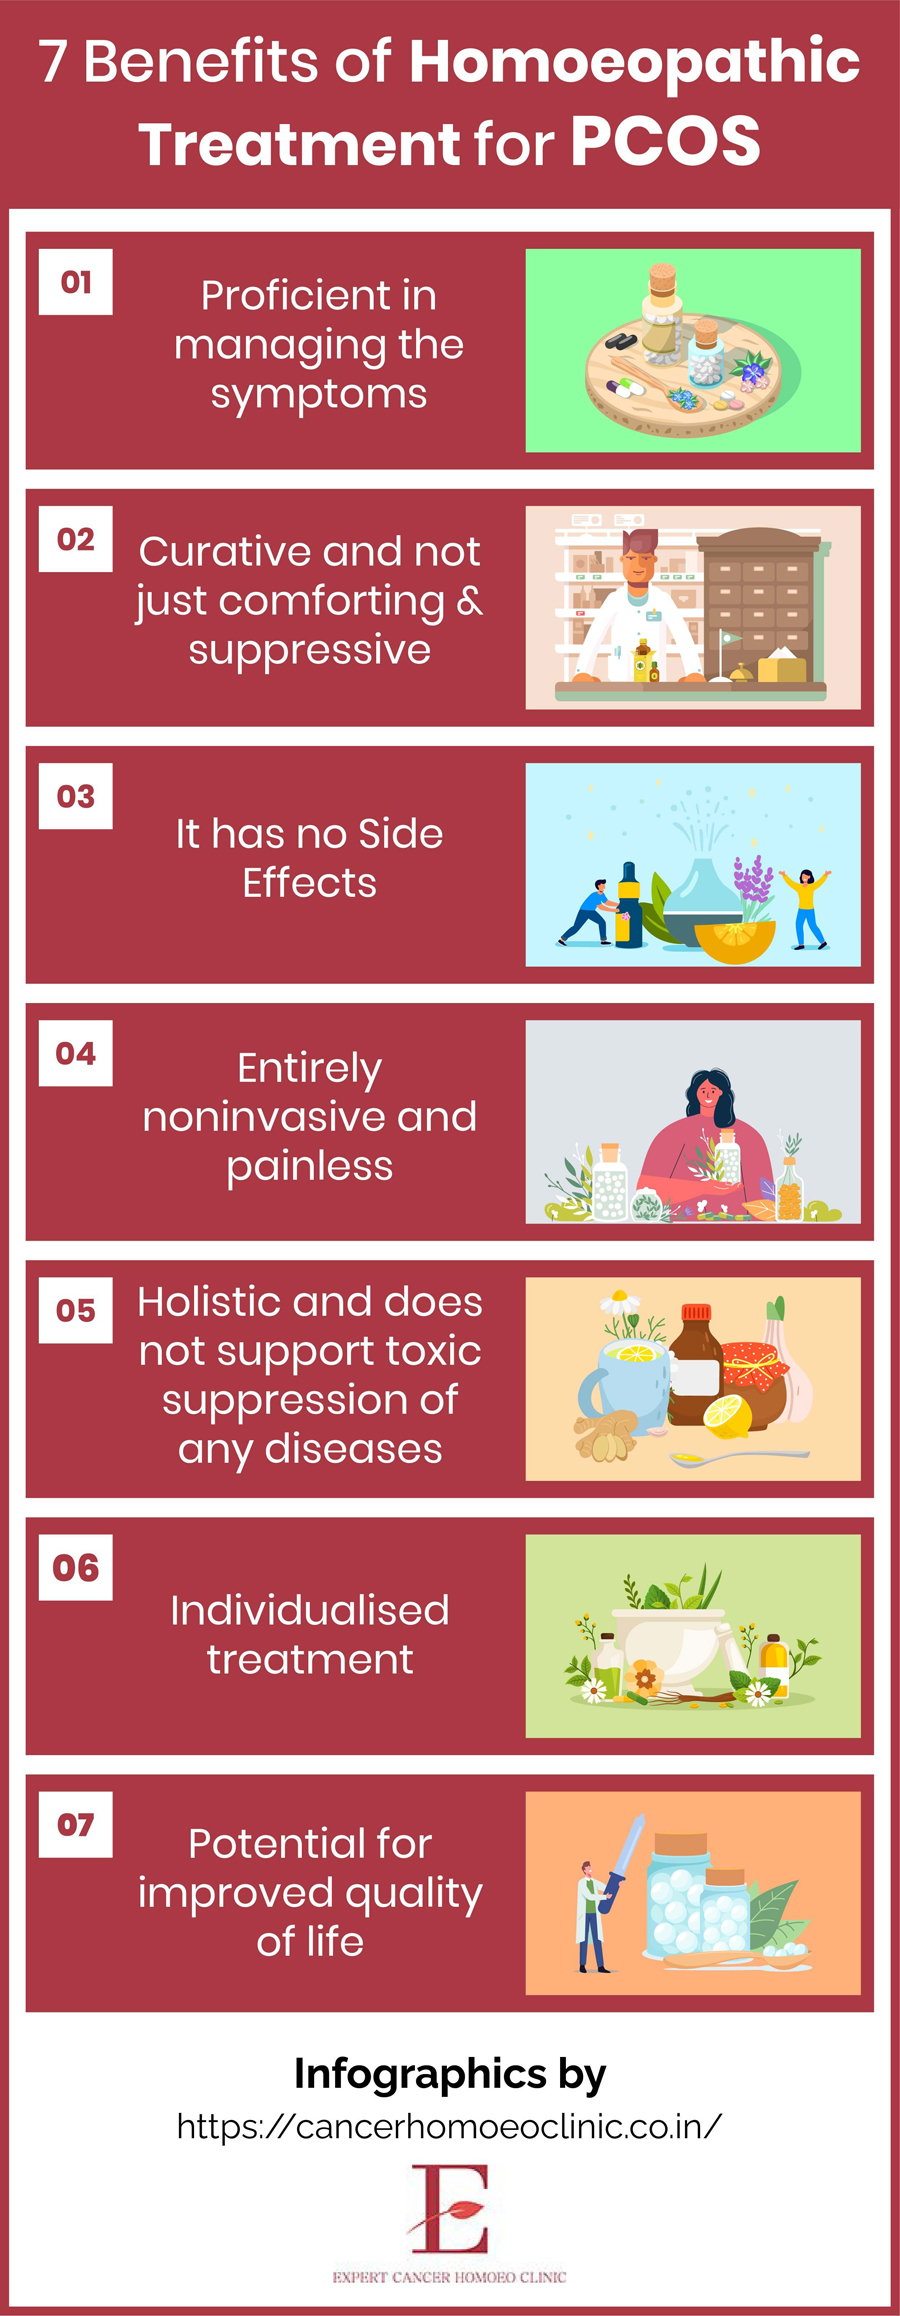 Homeopathic treatment for PCOS